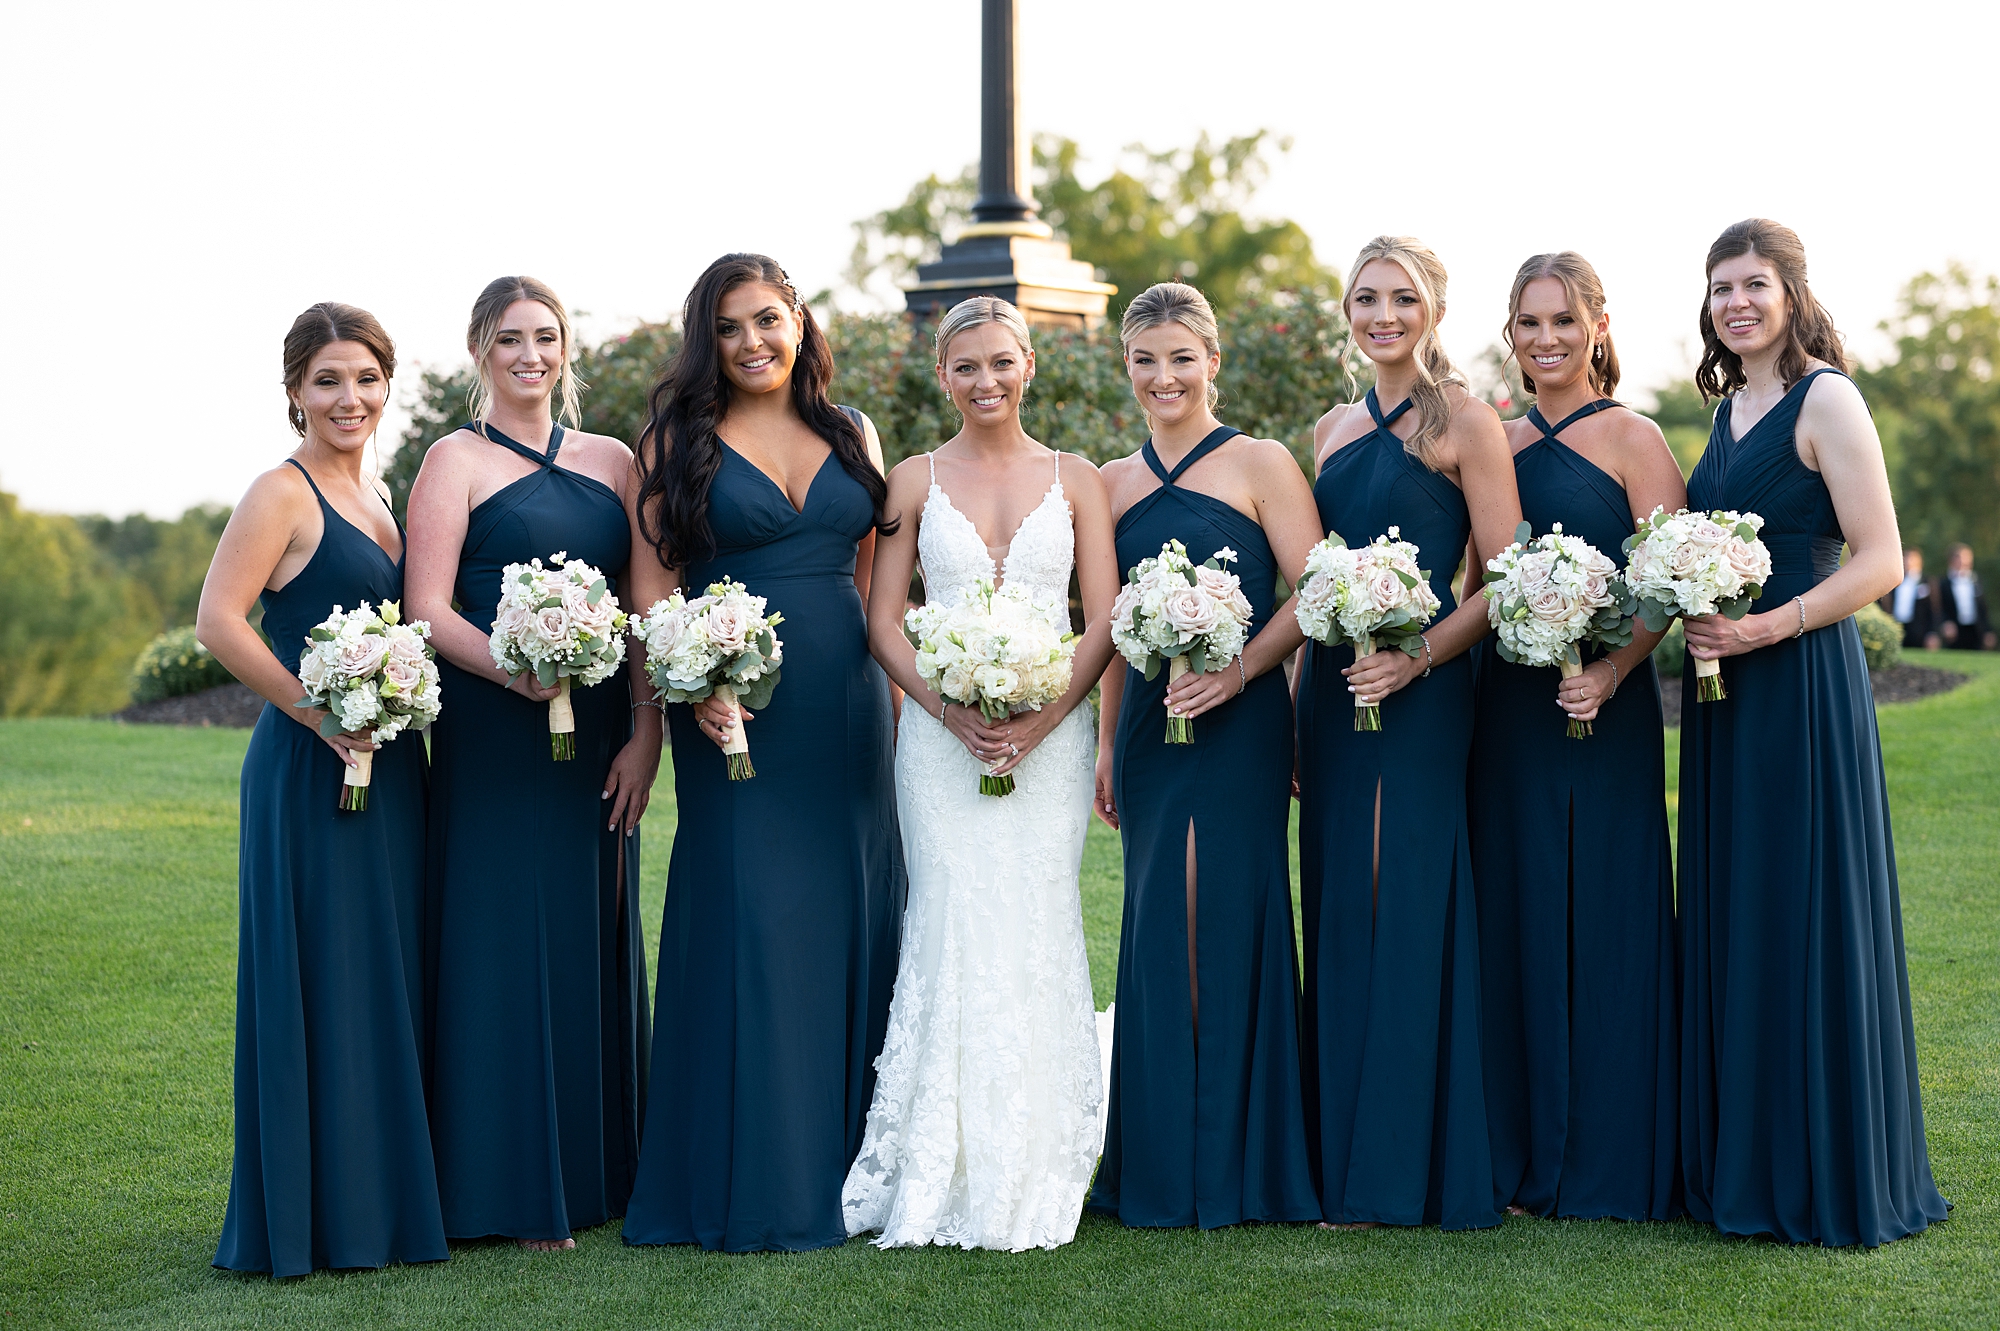 bride poses with bridesmaids in navy gowns with white flowers 